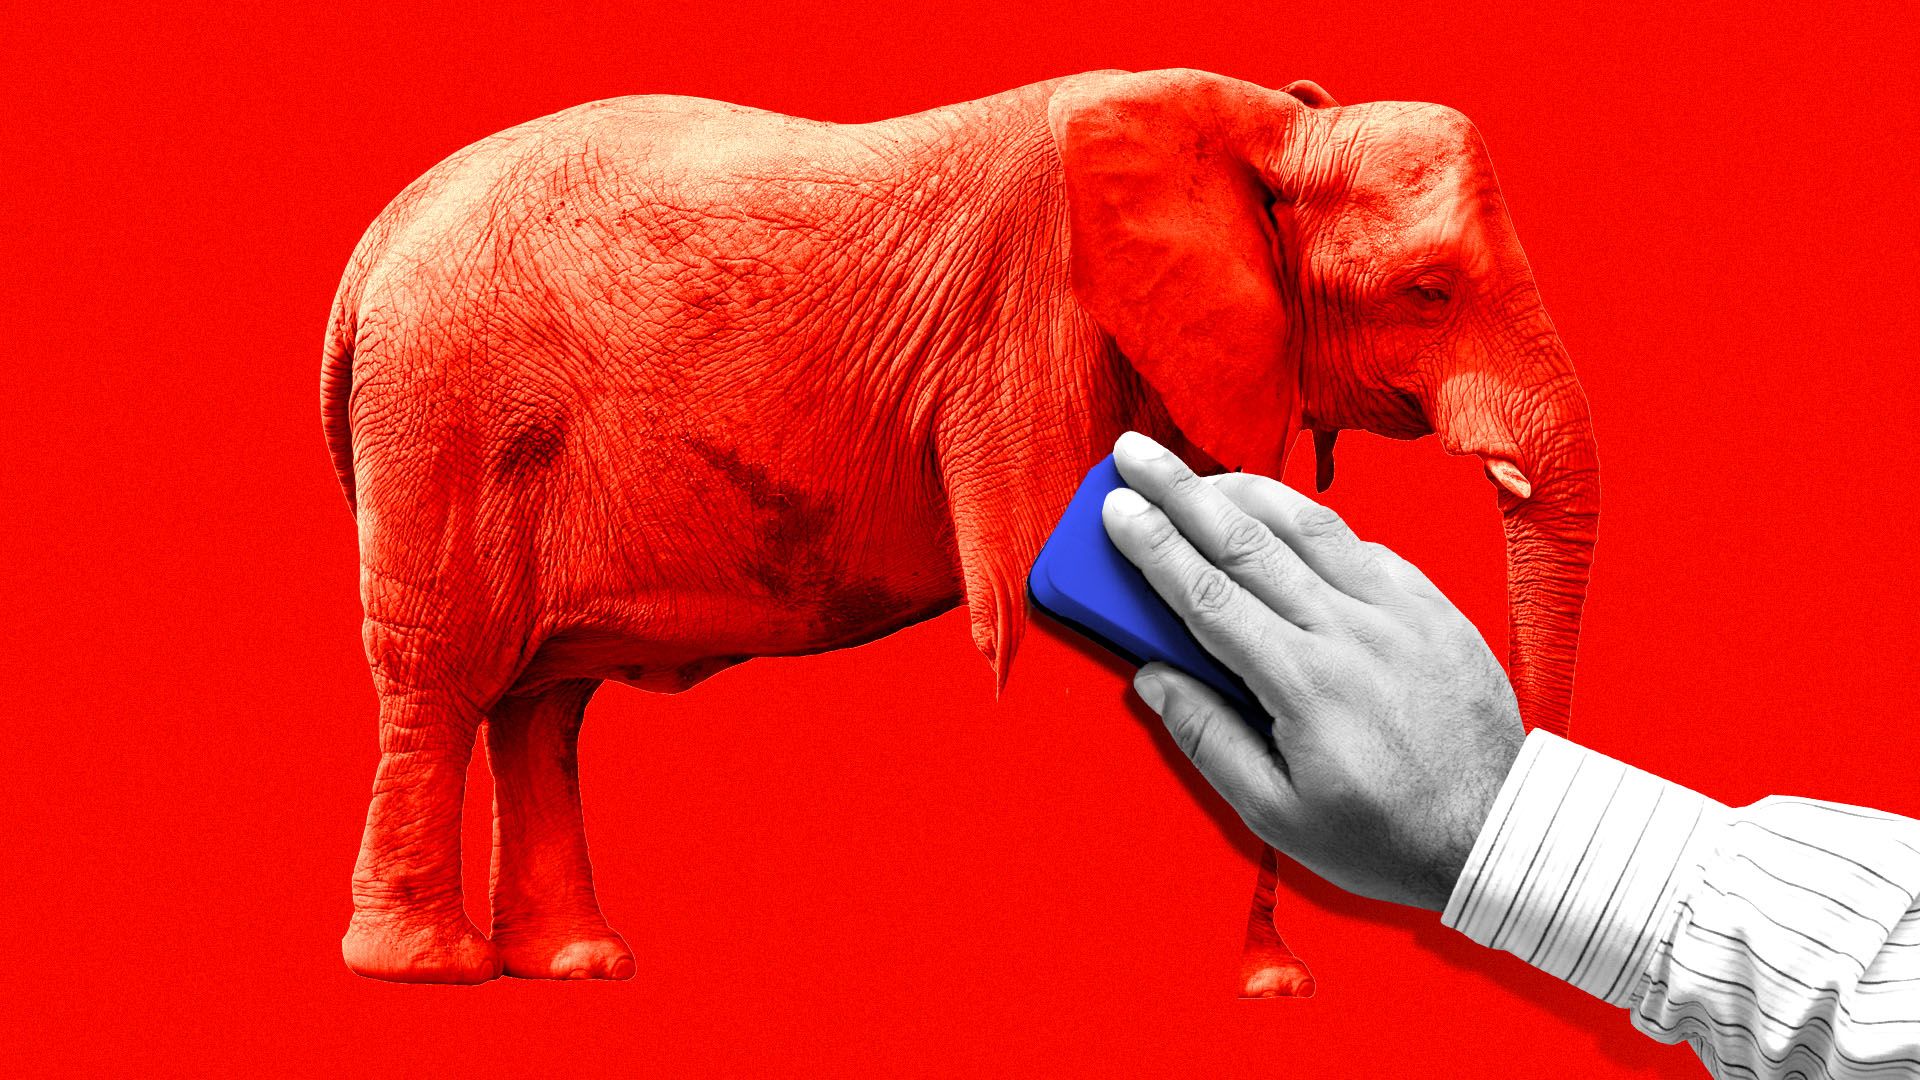 Illustration of a hand erasing an elephant on a red background